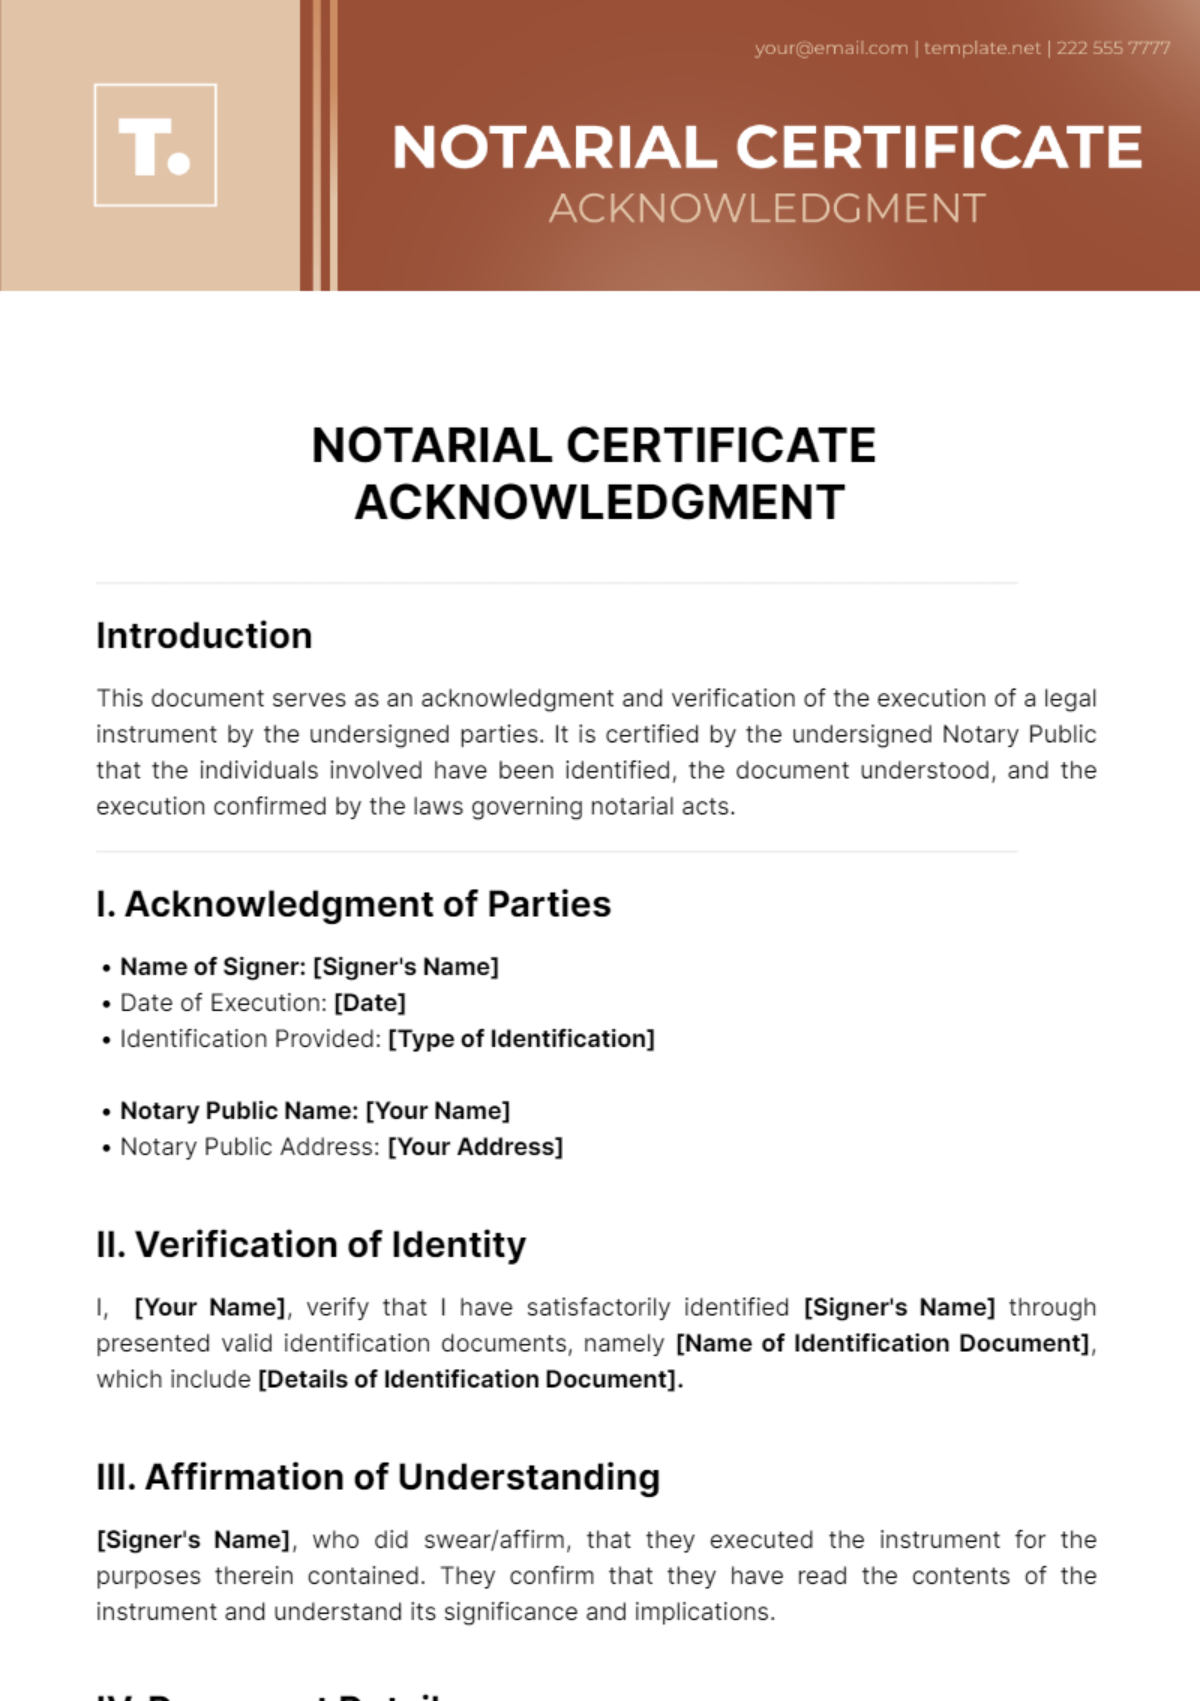 Free Notarial Certificate Acknowledgment Template